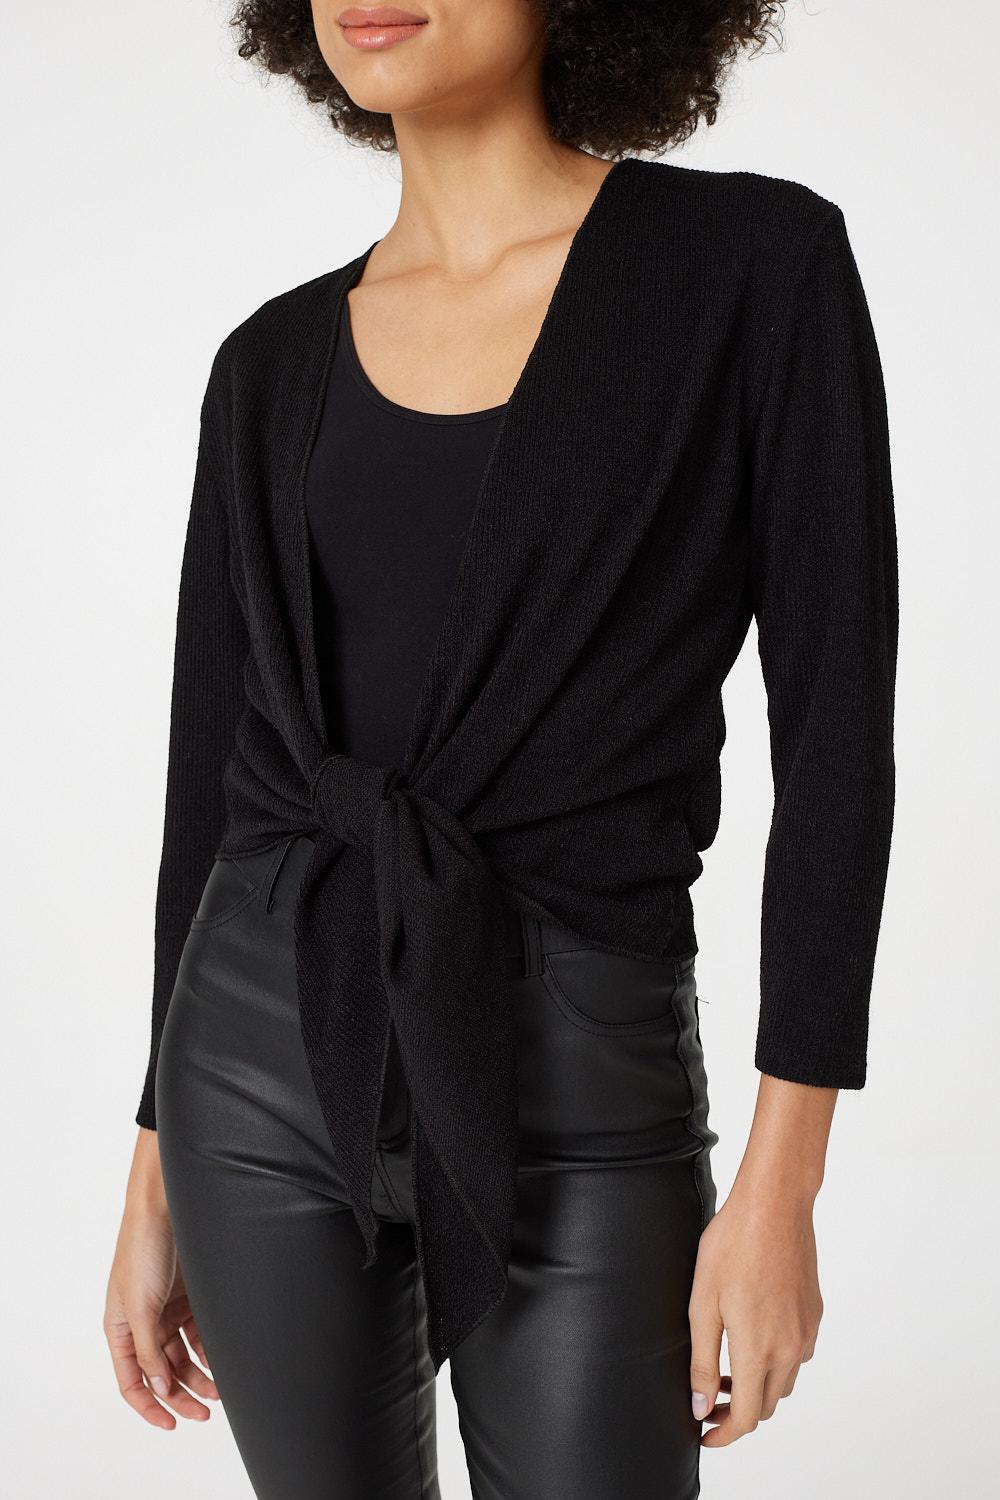 Black | Tie Front Cropped Knit Cardigan